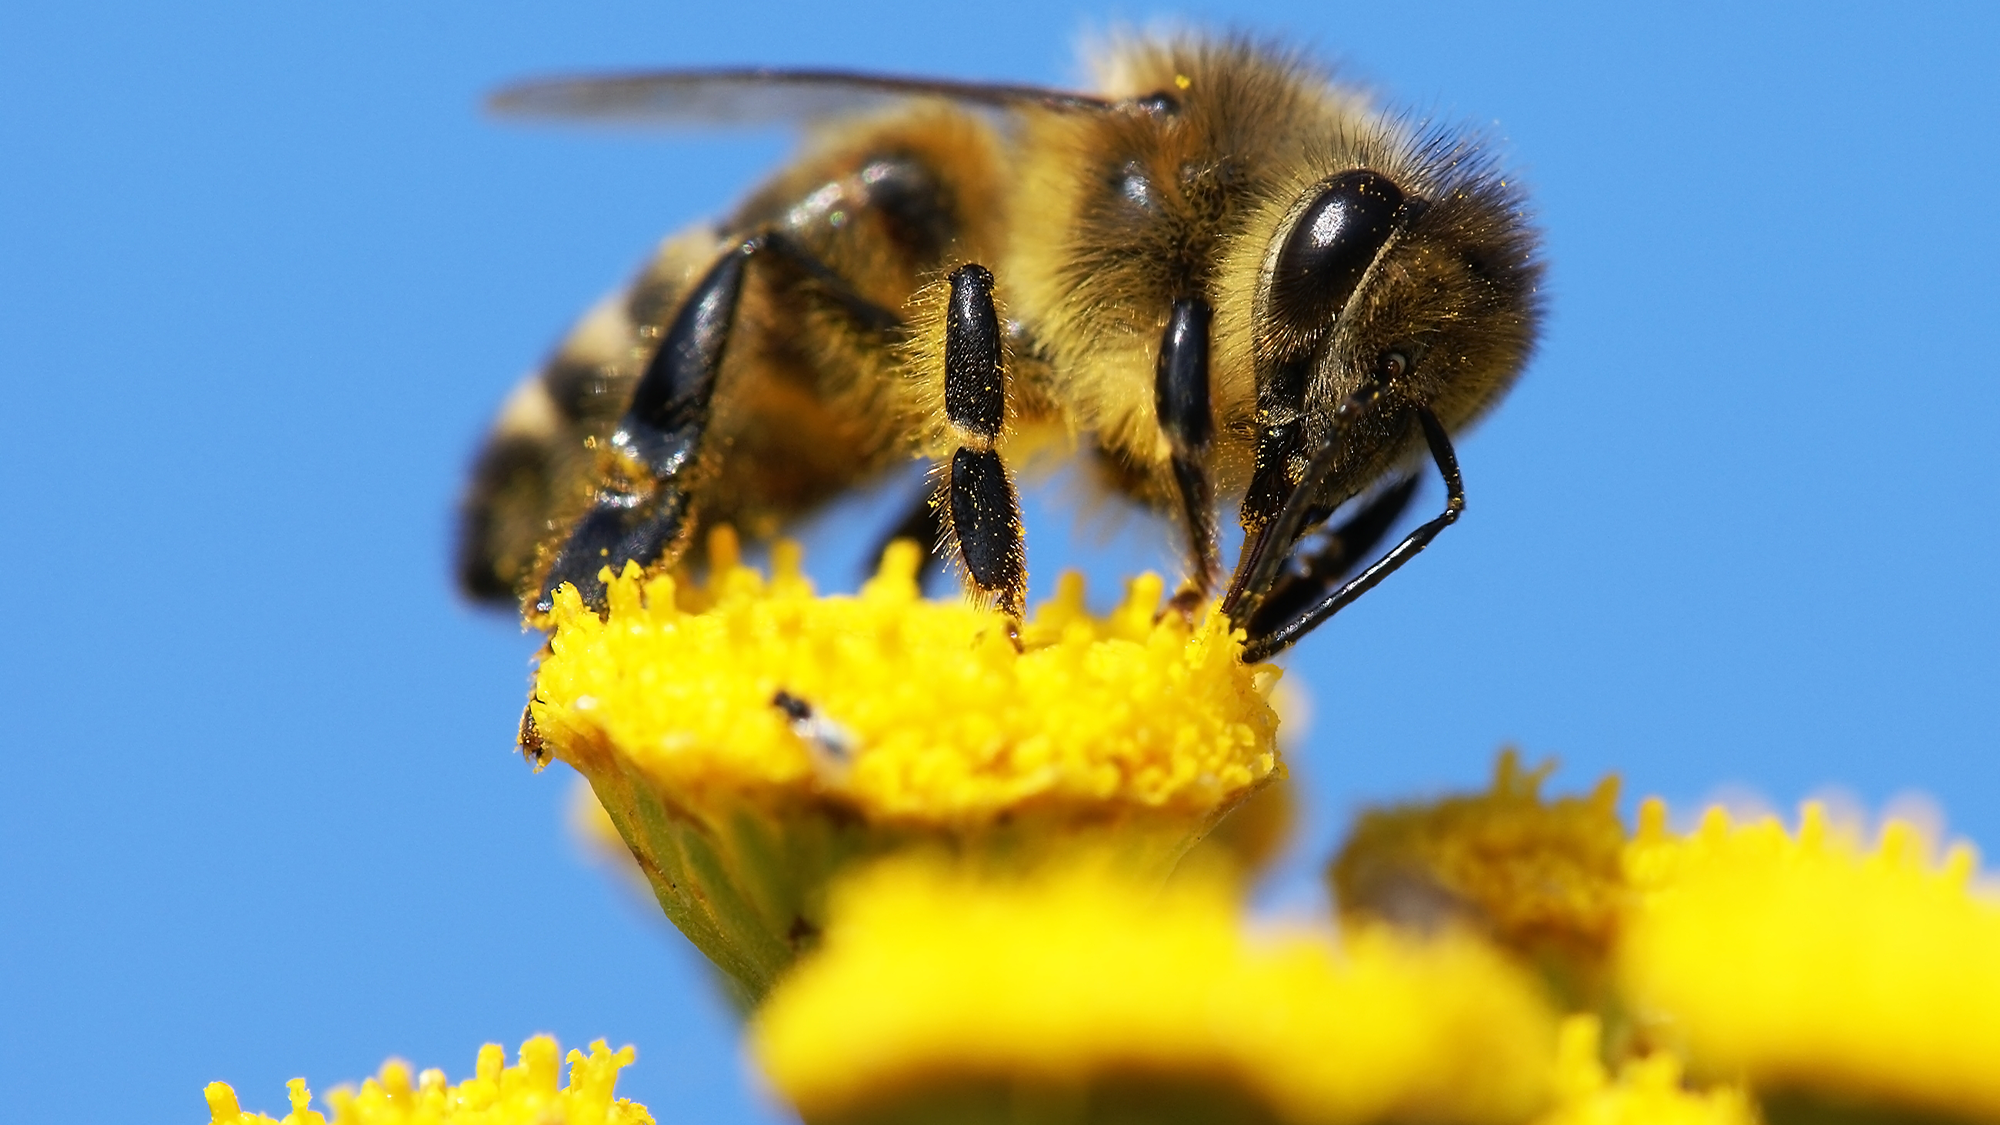 A honey bee pollinates a yellow flower against a bright blue sky.